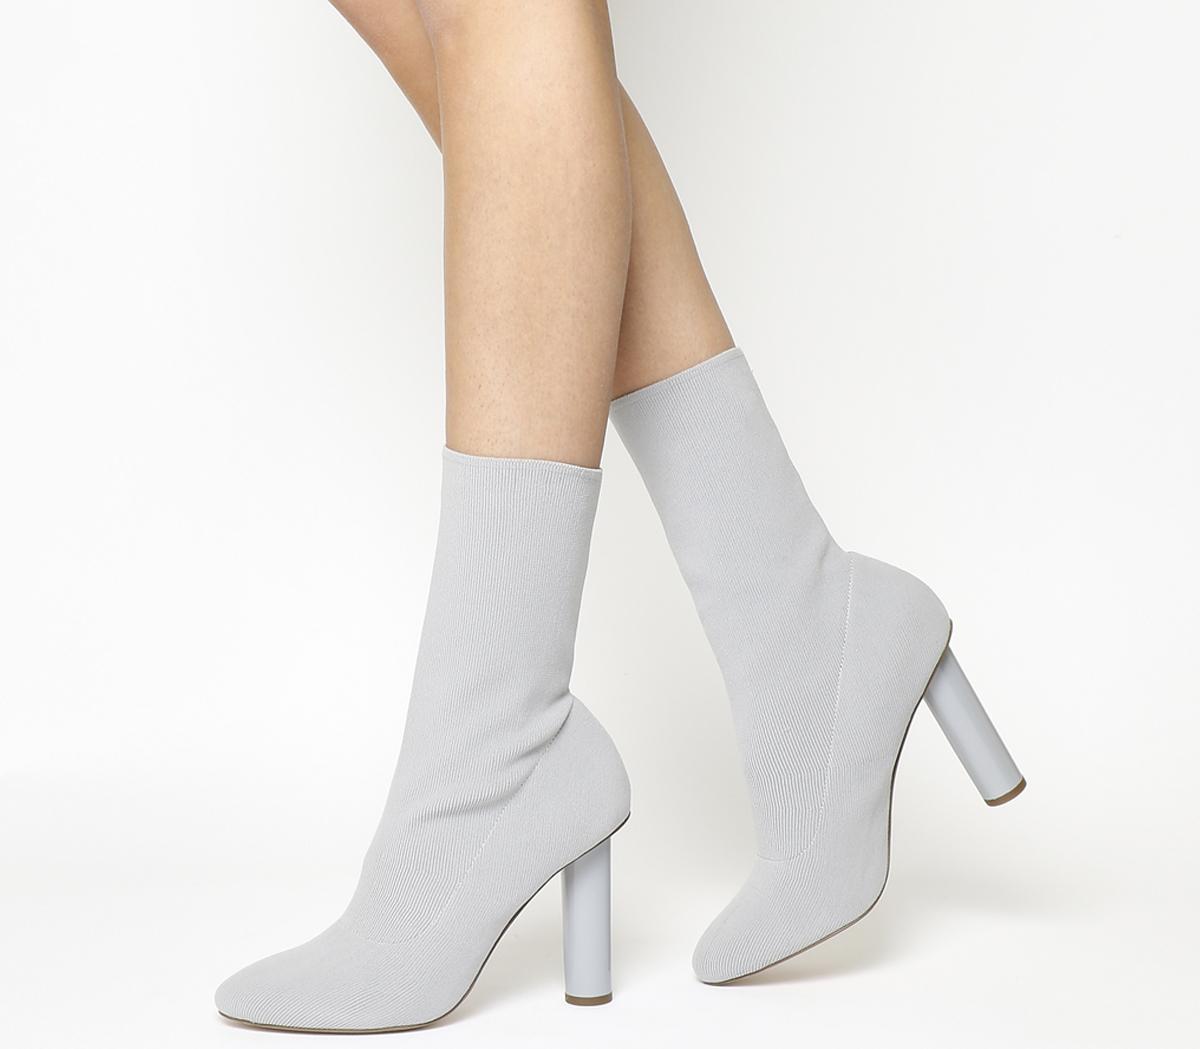 ankle sock boots uk